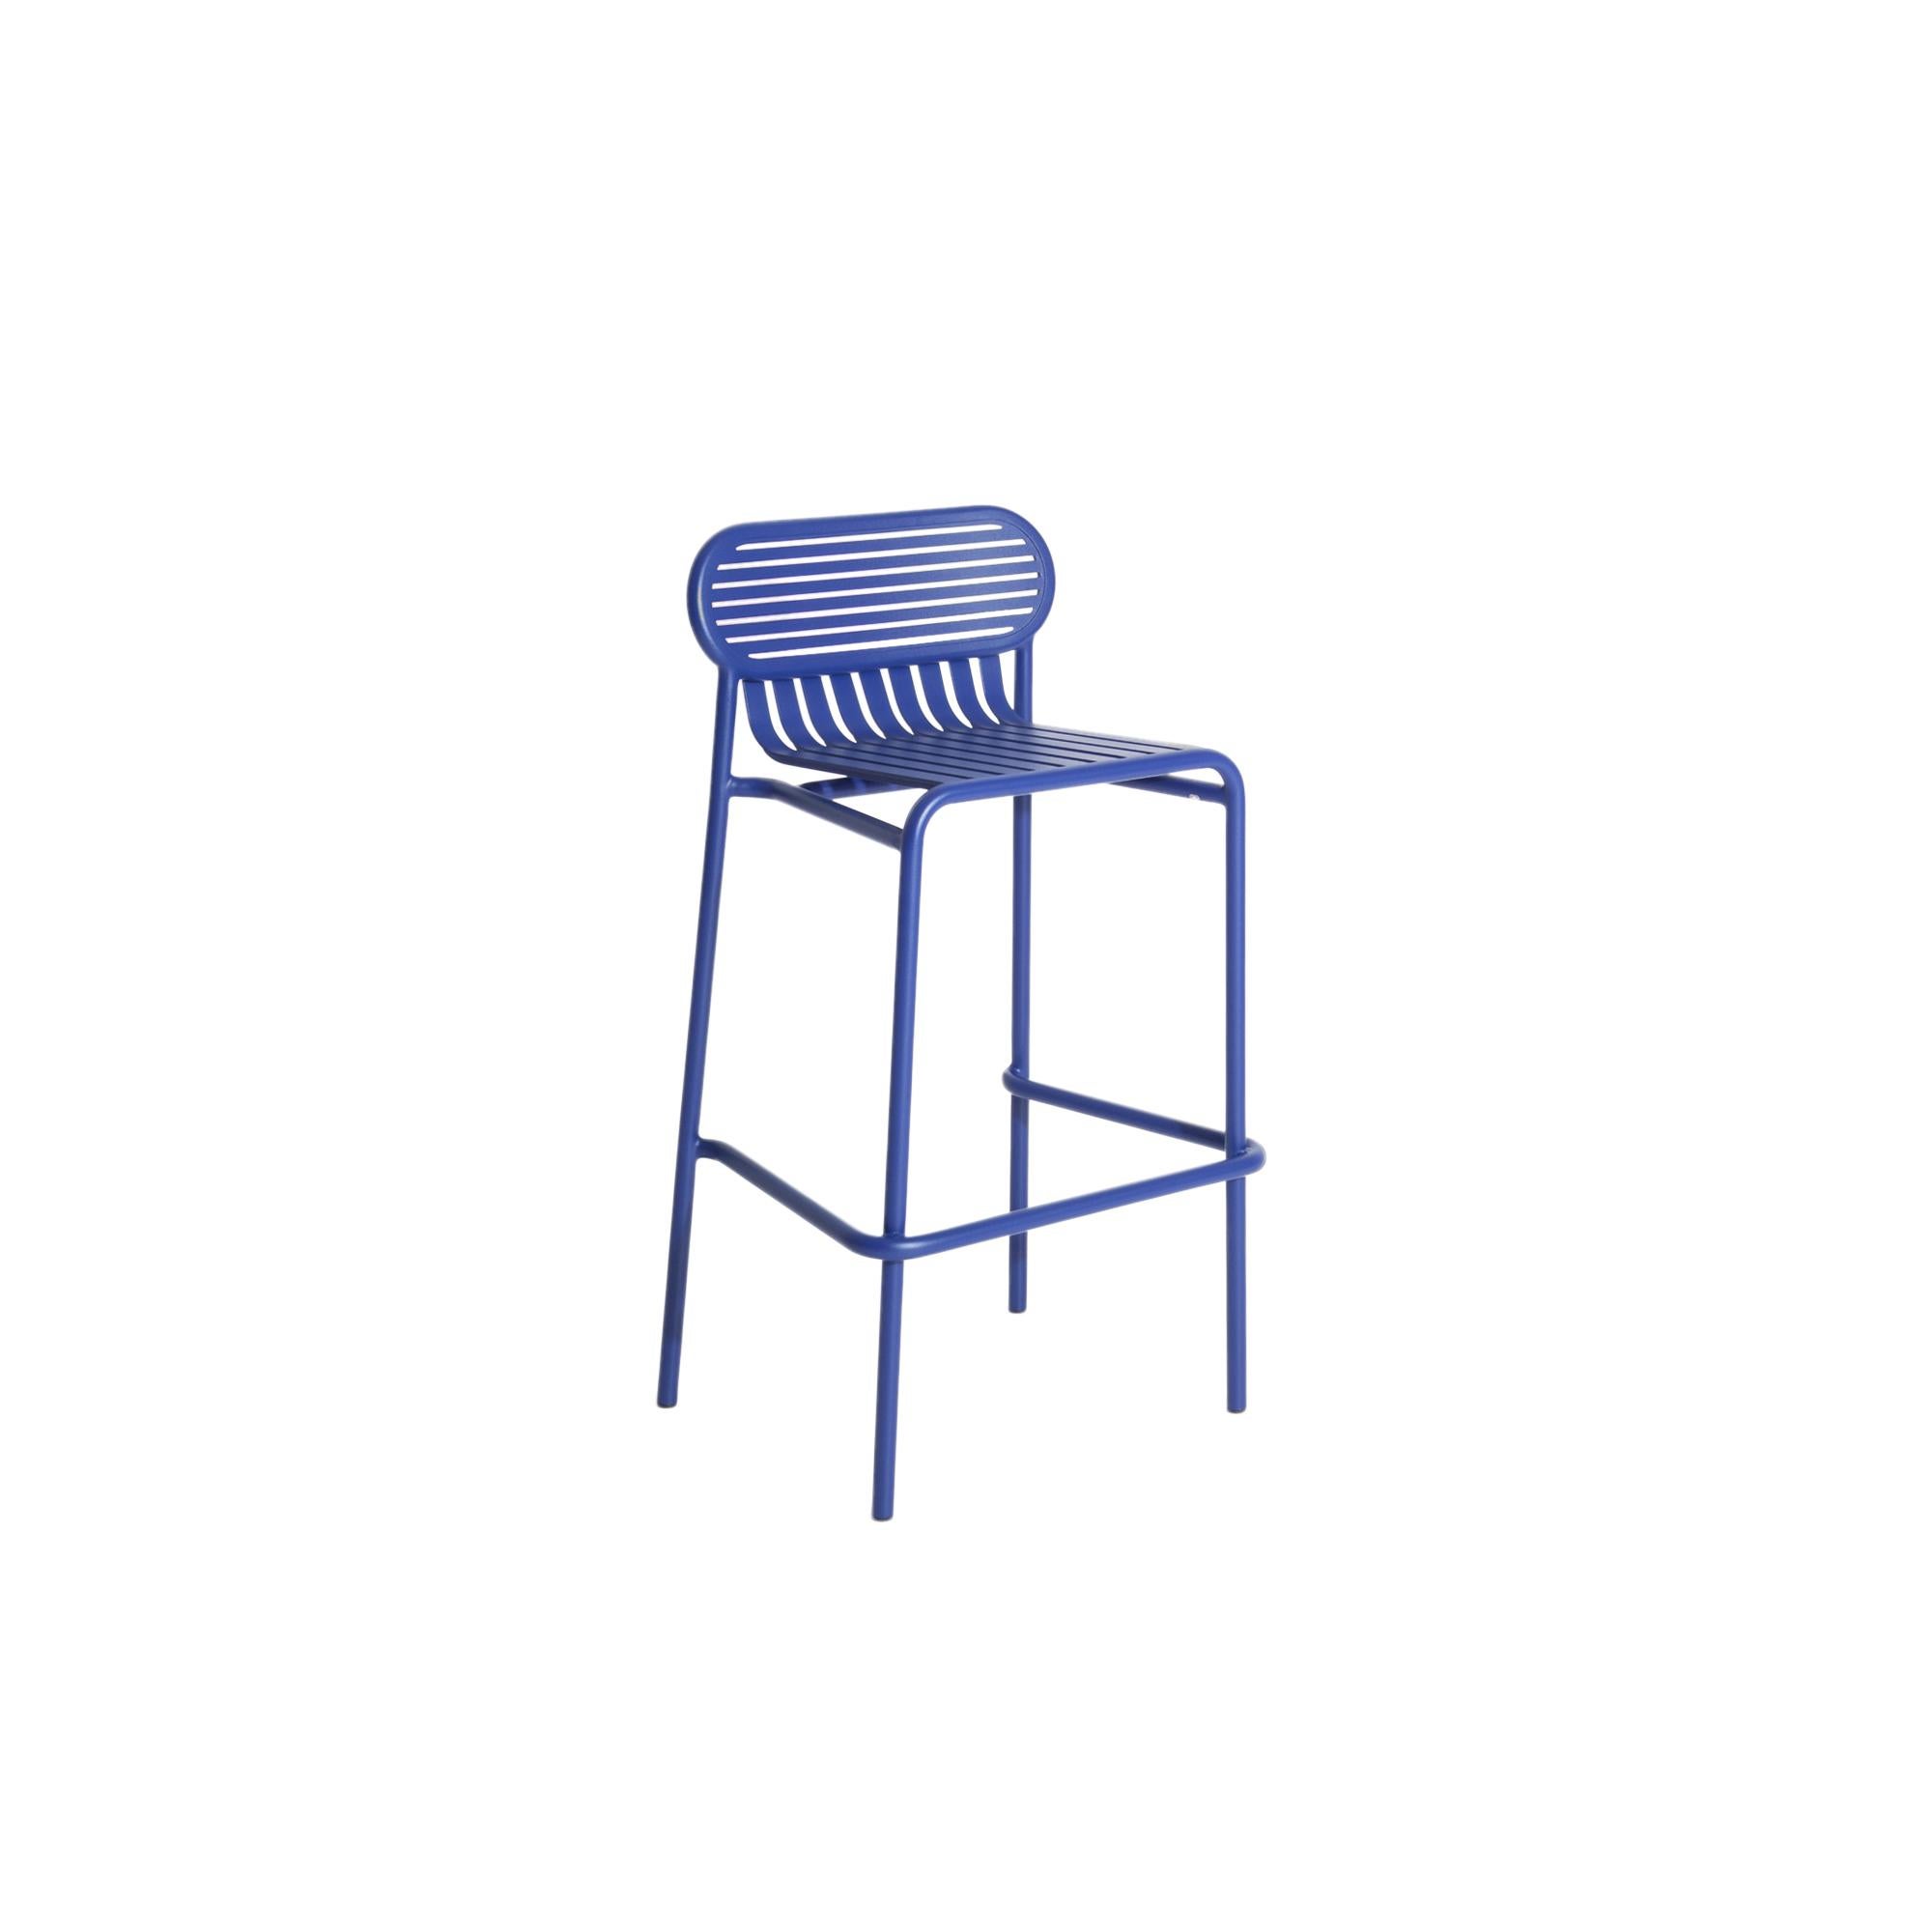 Petite Friture Week-End Bar Stool in Blue Aluminium by Studio BrichetZiegler, 2017

The week-end collection is a full range of outdoor furniture, in aluminium grained epoxy paint, matt finish, that includes 18 functions and 8 colours for the